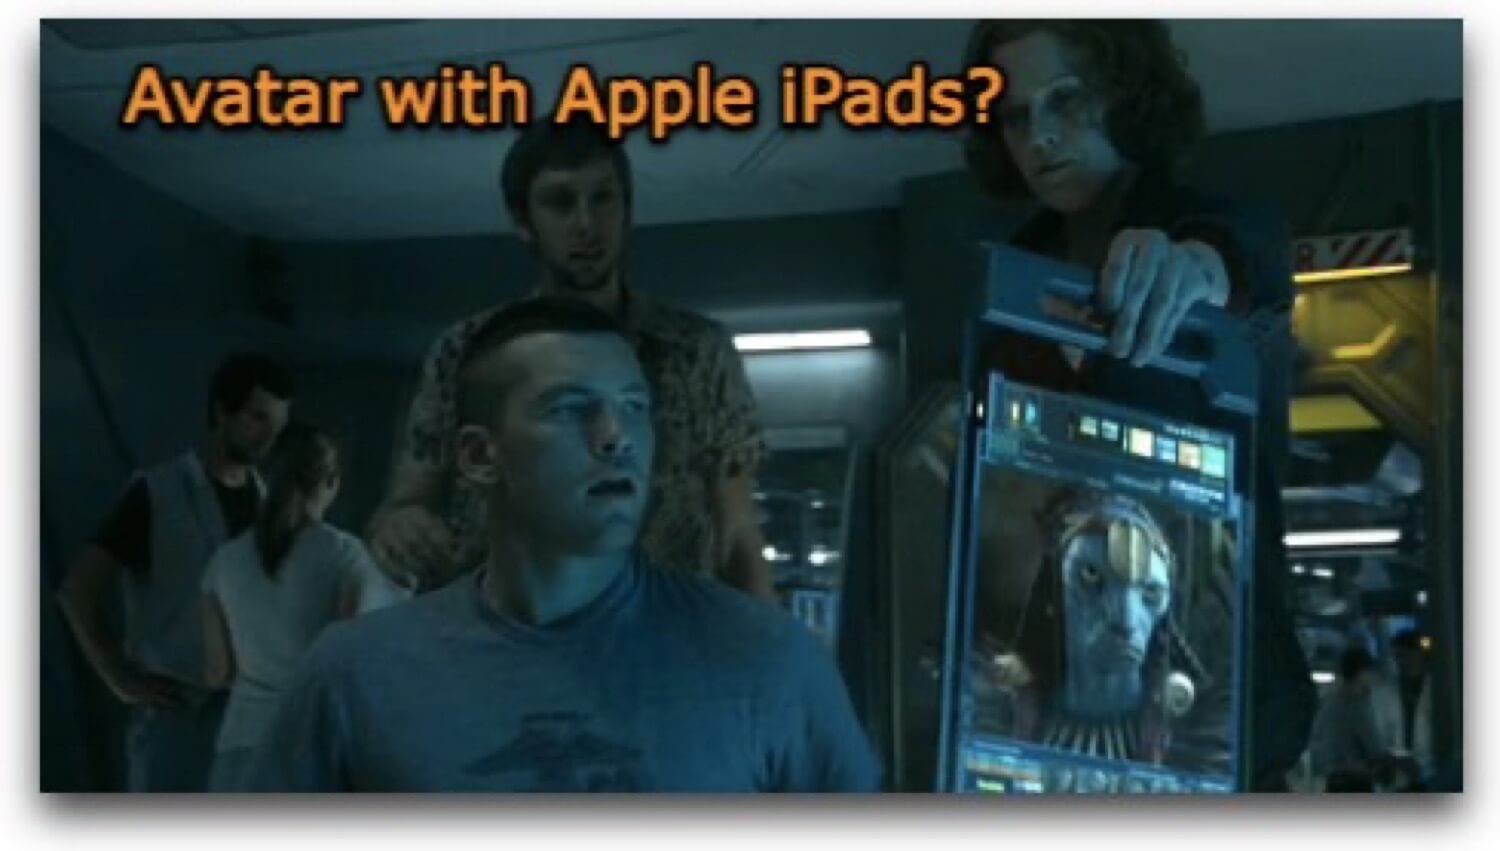 Avatar - massive usage of Apple iPads and Touch Computing